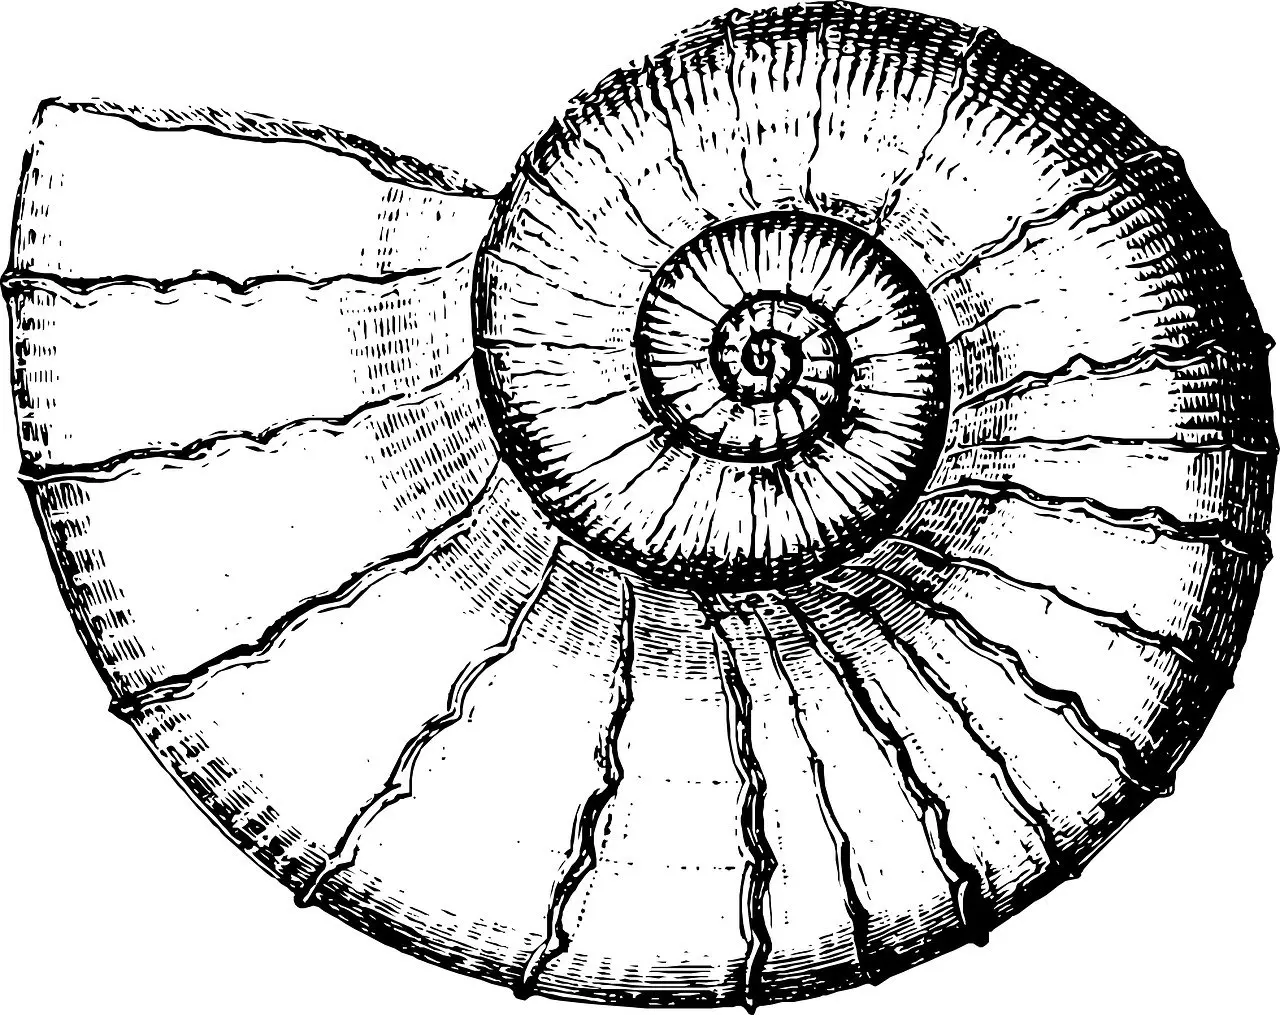 The Golden Ratio in the Nautilus Shell